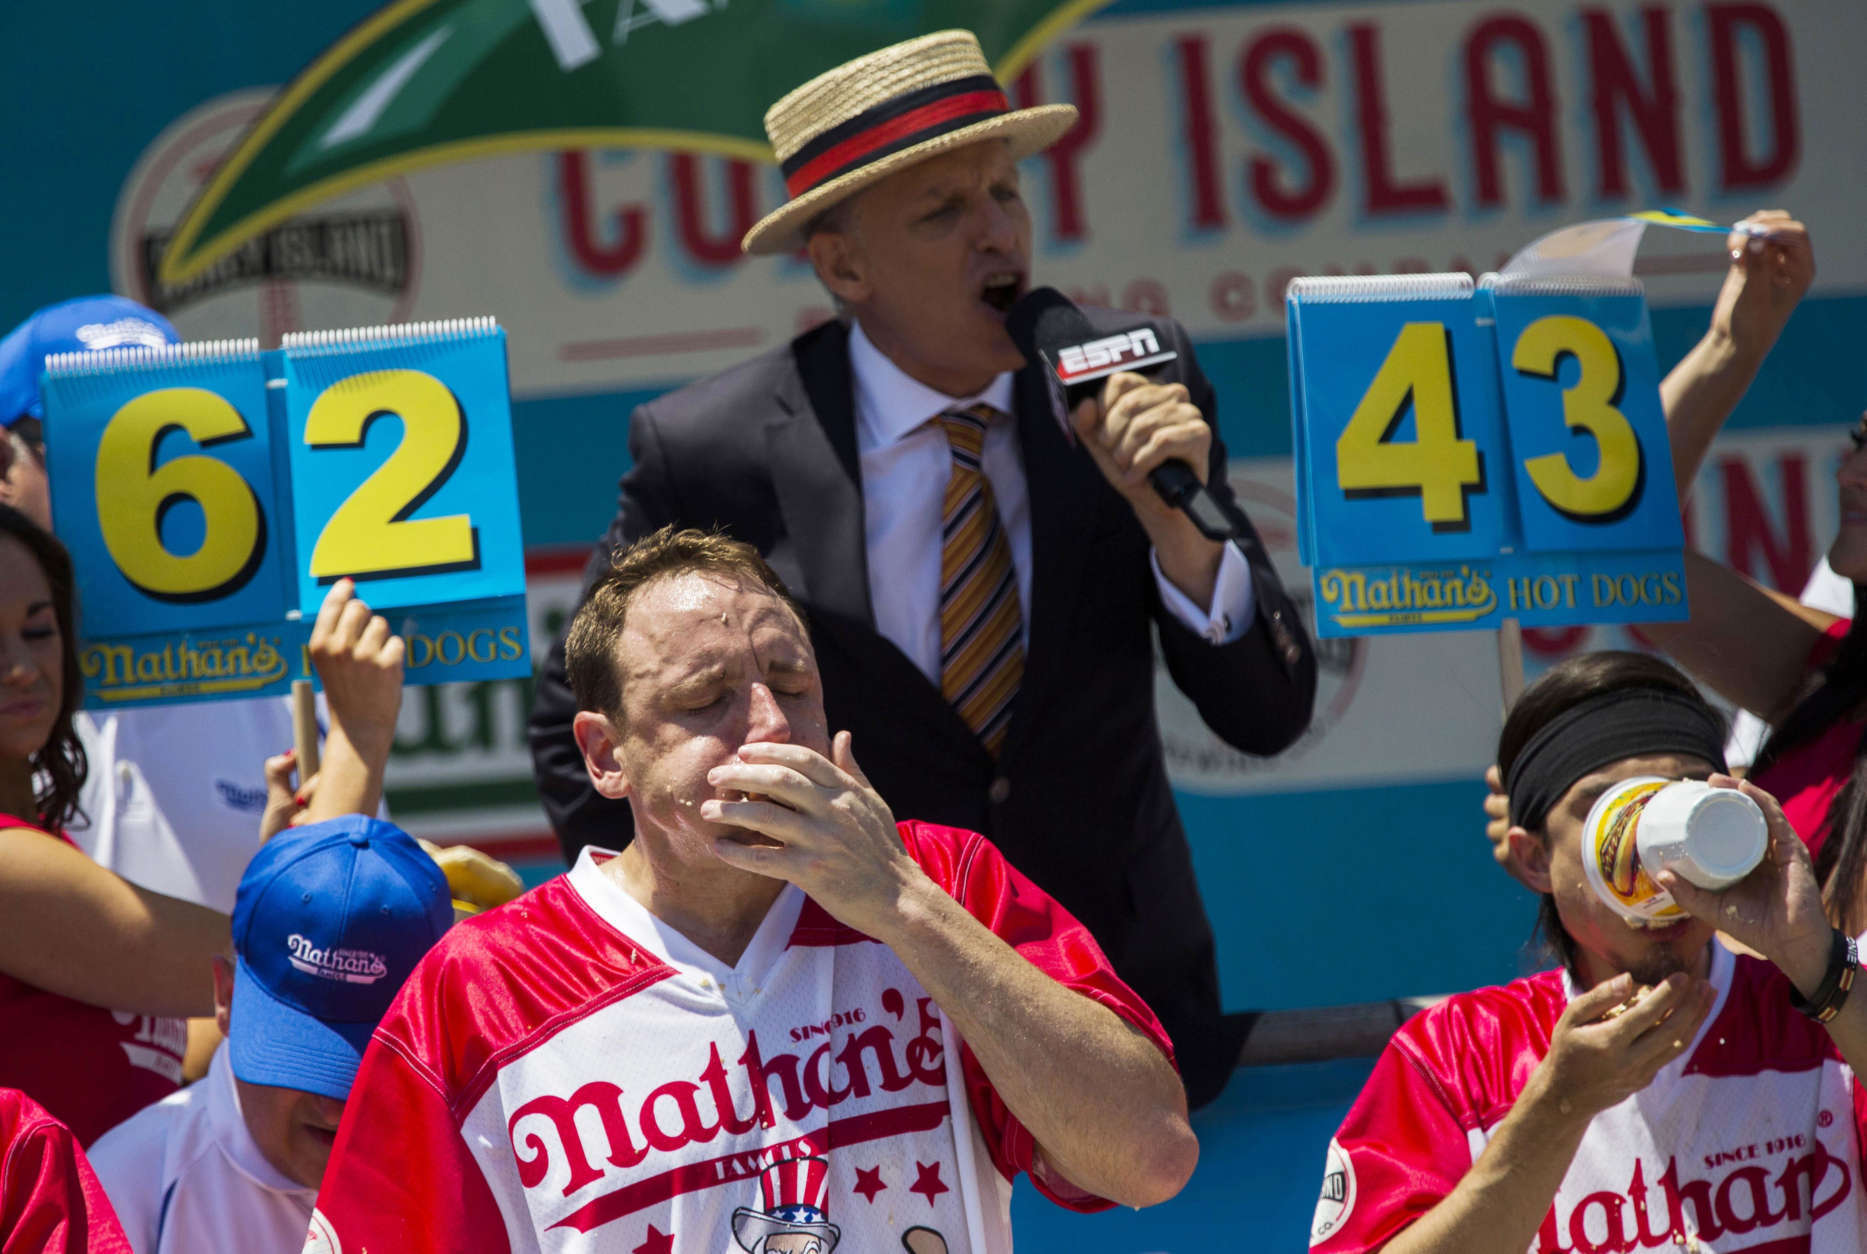 Joey Chestnut, left, and Matt Stonie compete in the Nathan's Famous Hotdog eating contest Tuesday, July 4, 2017, in Brooklyn, New York. Chestnut ate 72 hotdogs in 10 minutes to claim his 10th win. (AP Photo/Michael Noble Jr.)